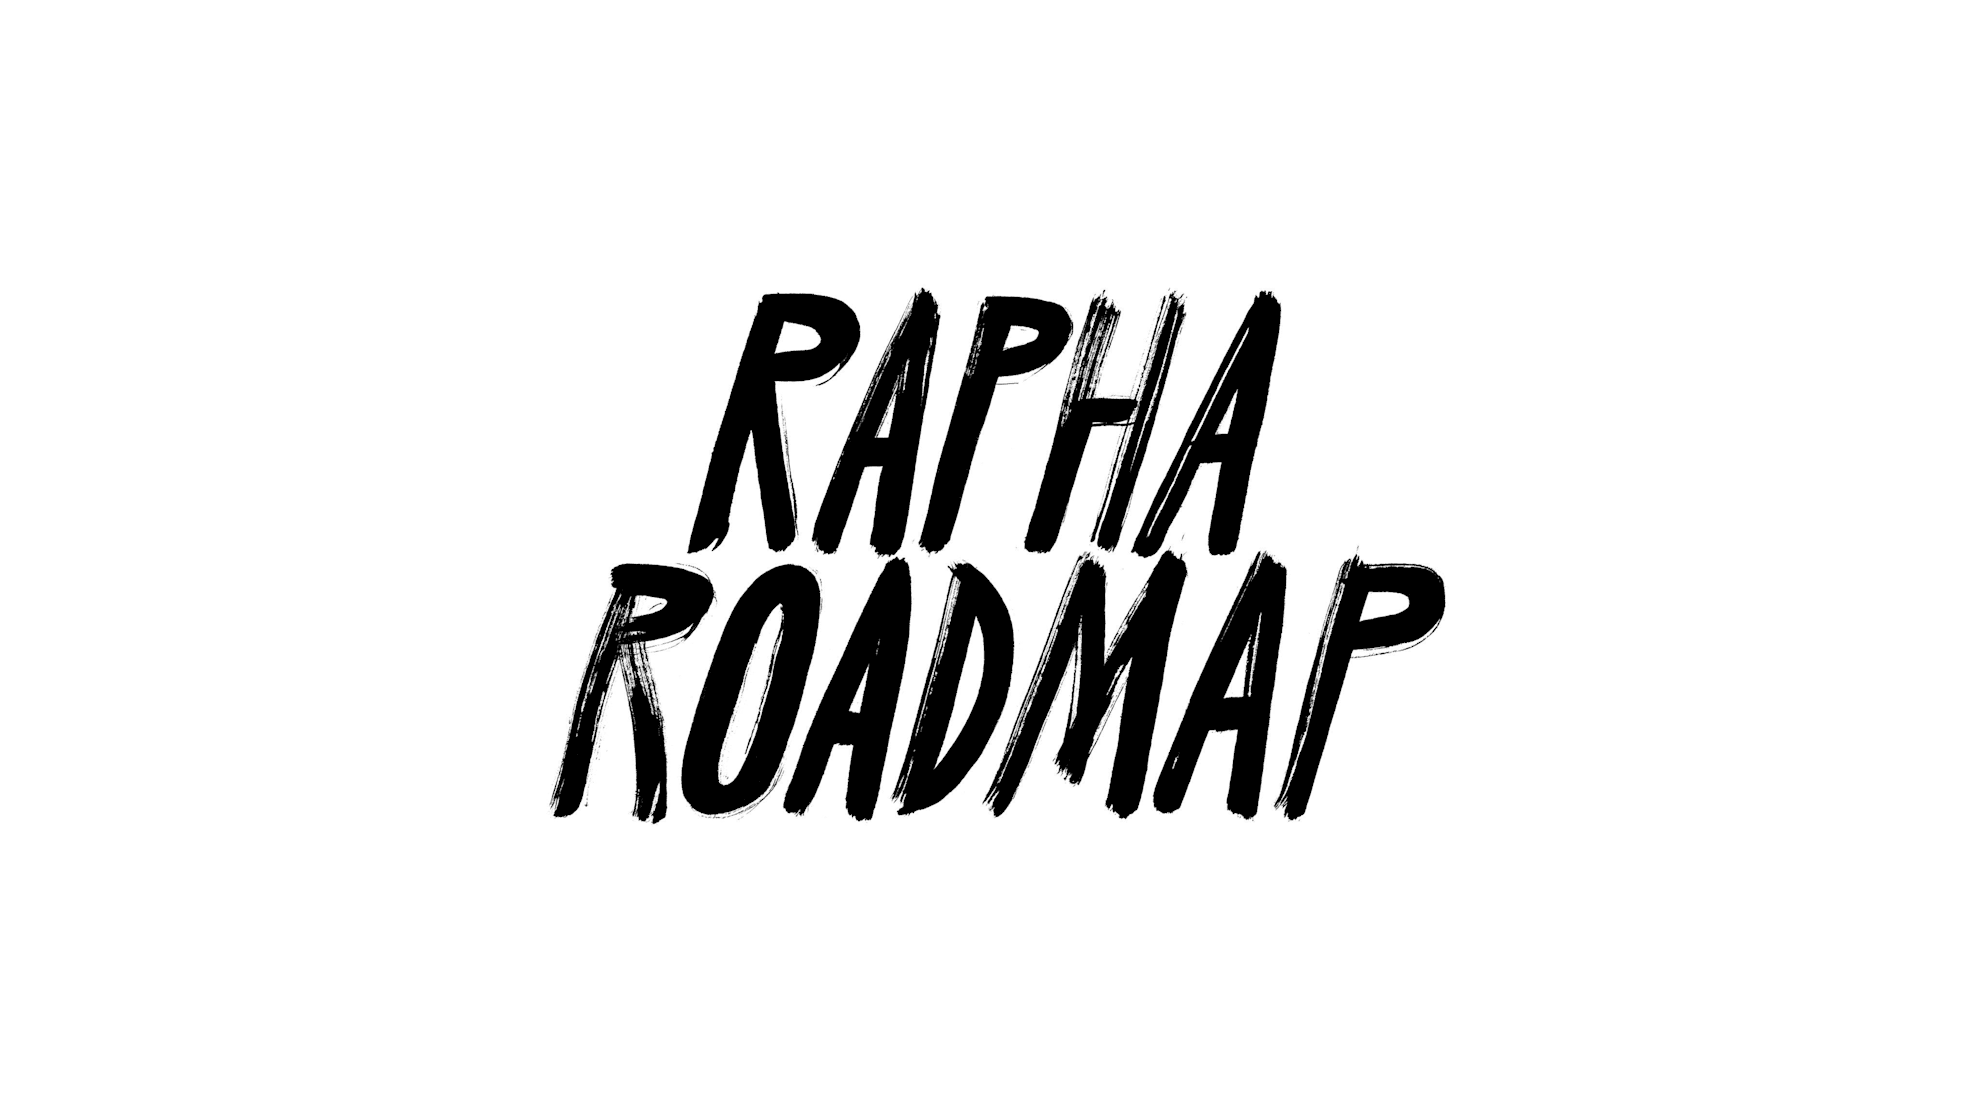 The Rapha Roadmap: Part Two